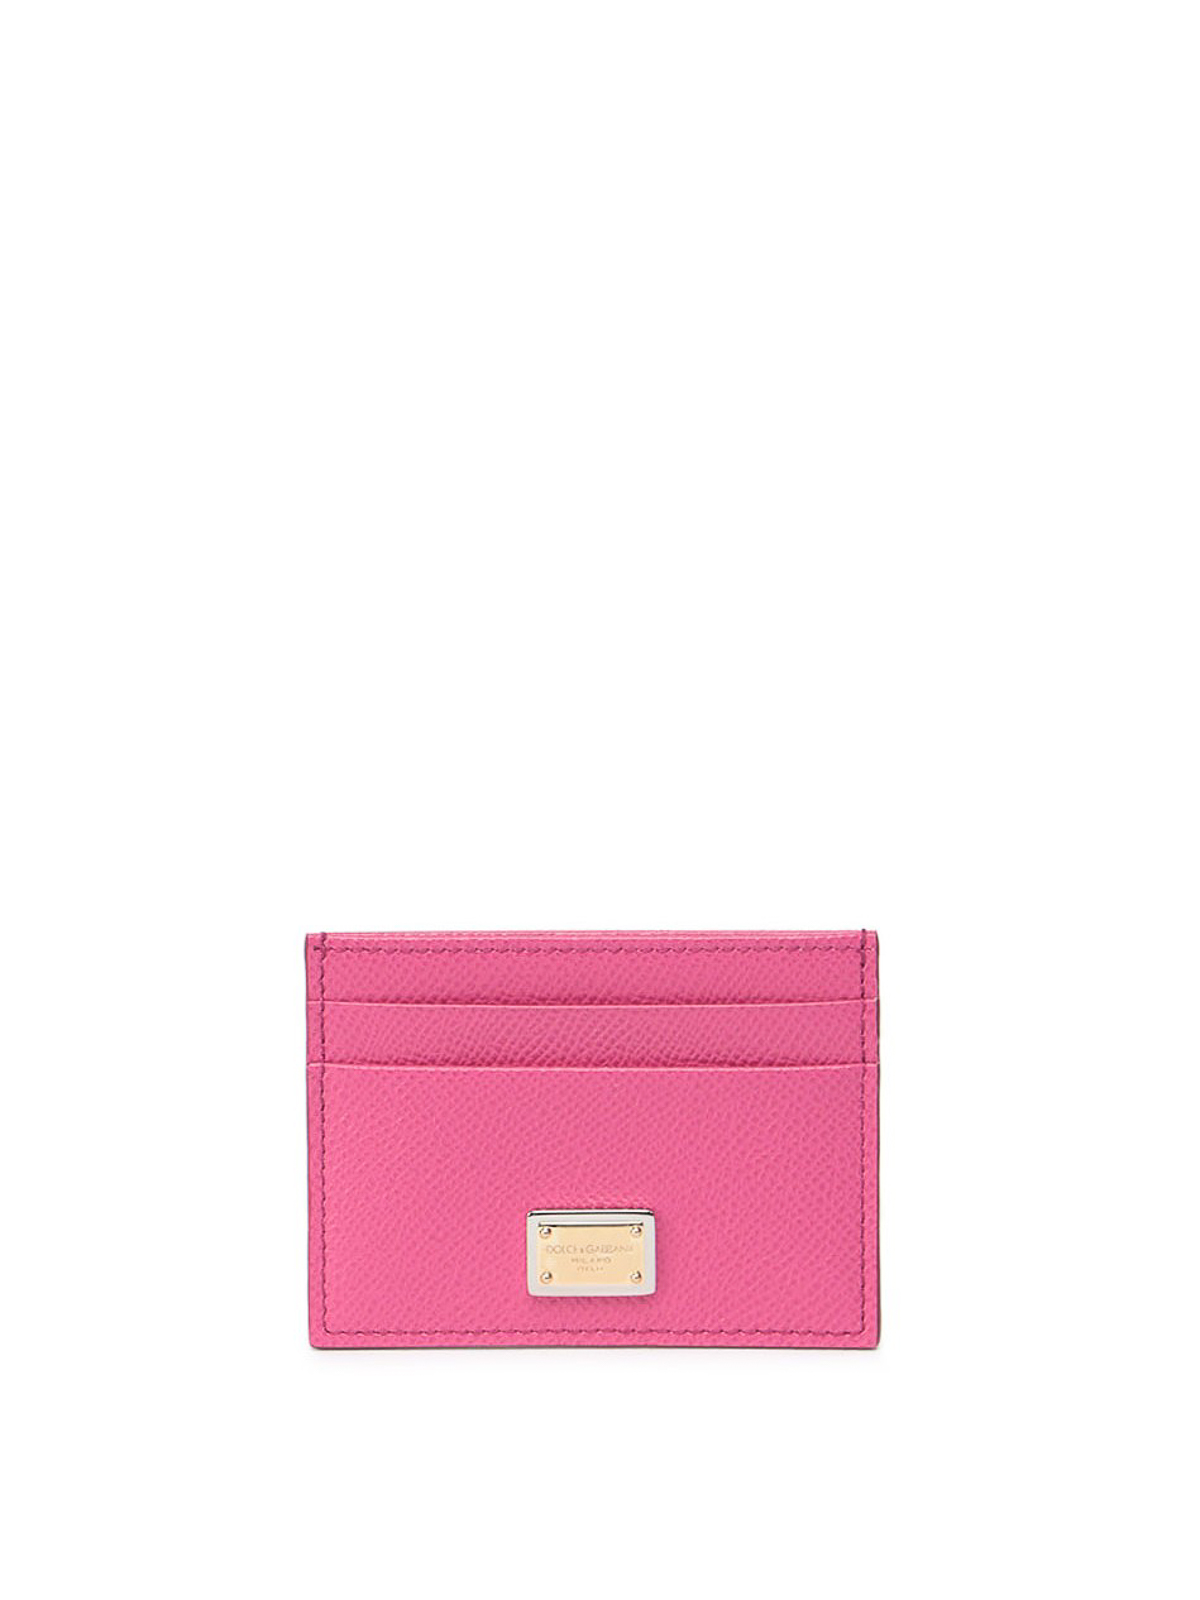 Wallets & purses Dolce & Gabbana - Dauphine leather card holder ...